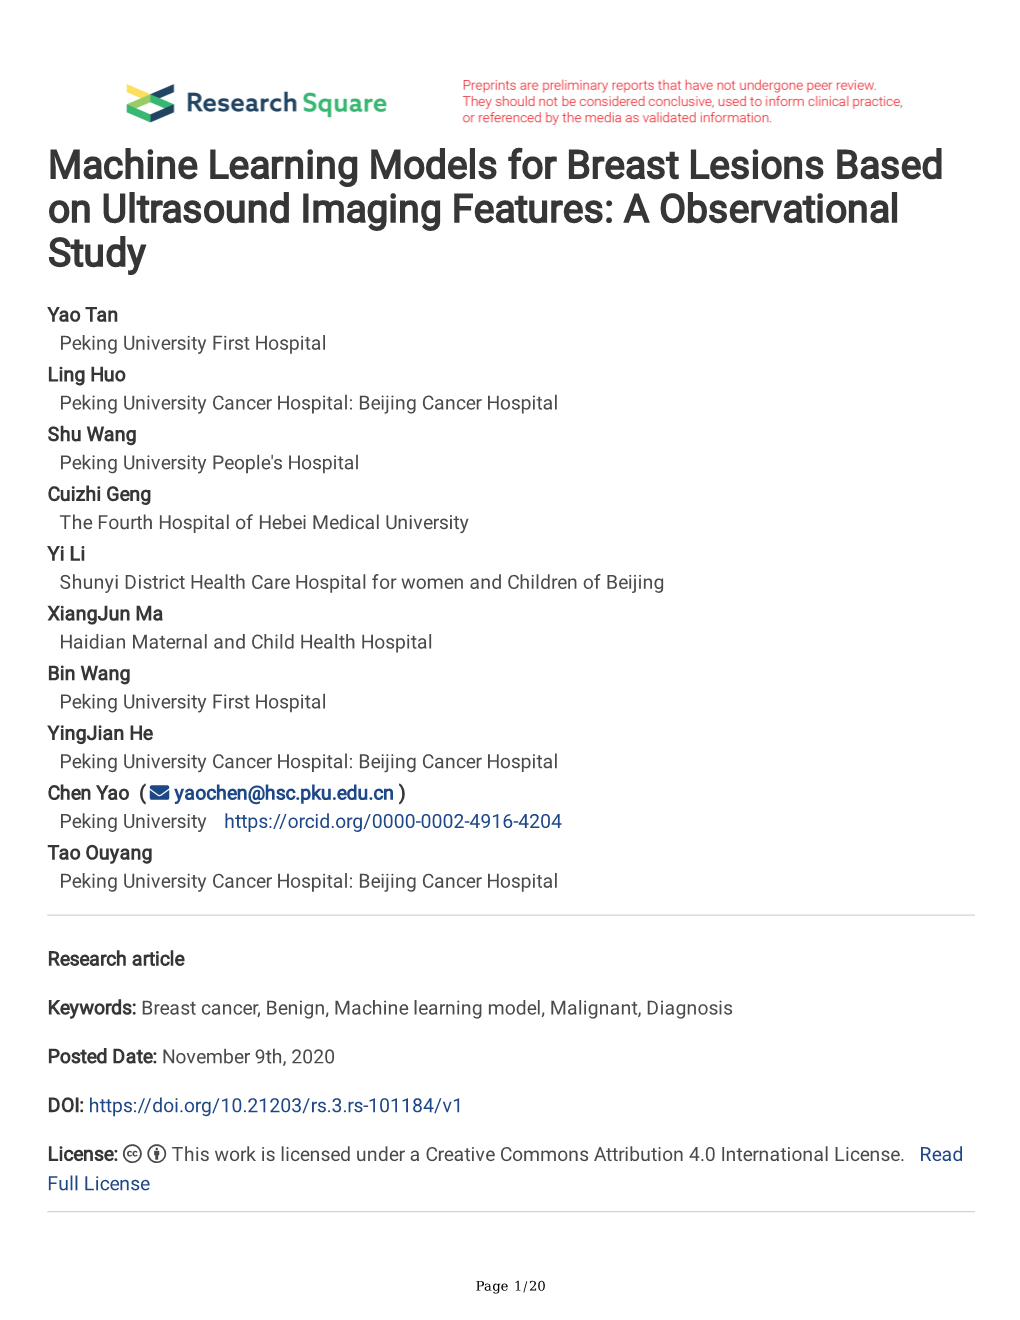 Machine Learning Models for Breast Lesions Based on Ultrasound Imaging Features: a Observational Study